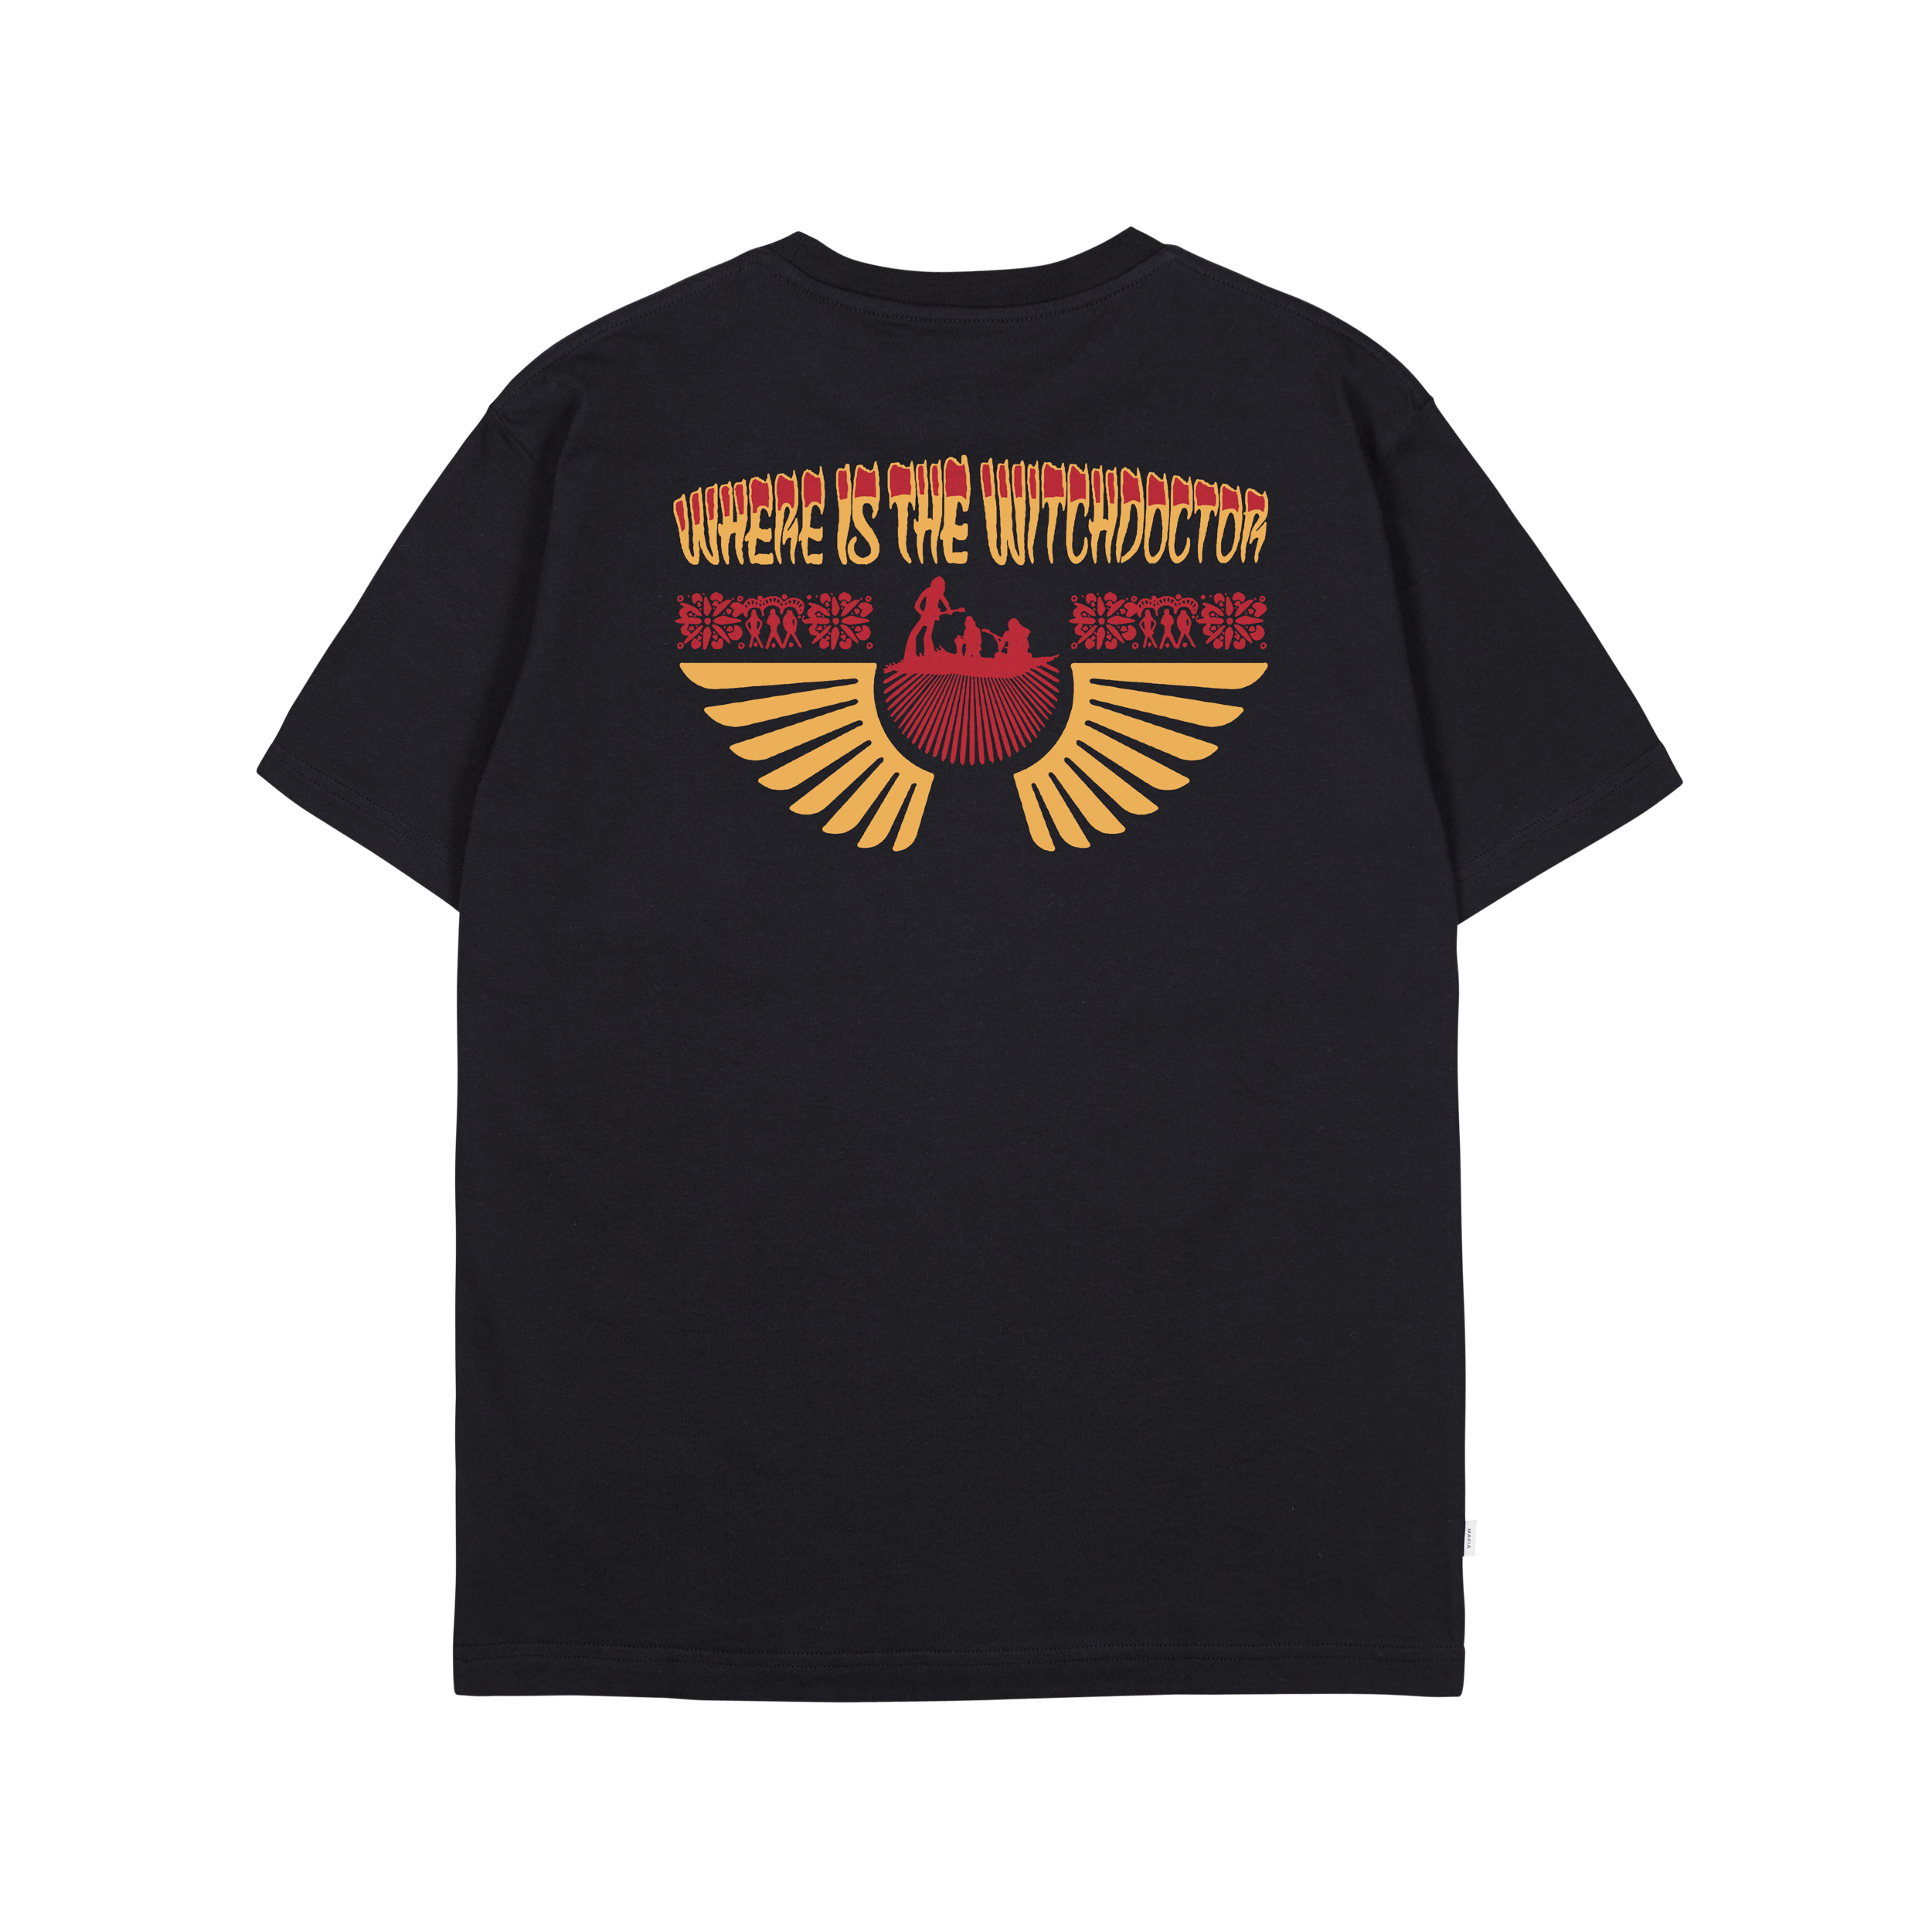 Witchdoctor T-shirt